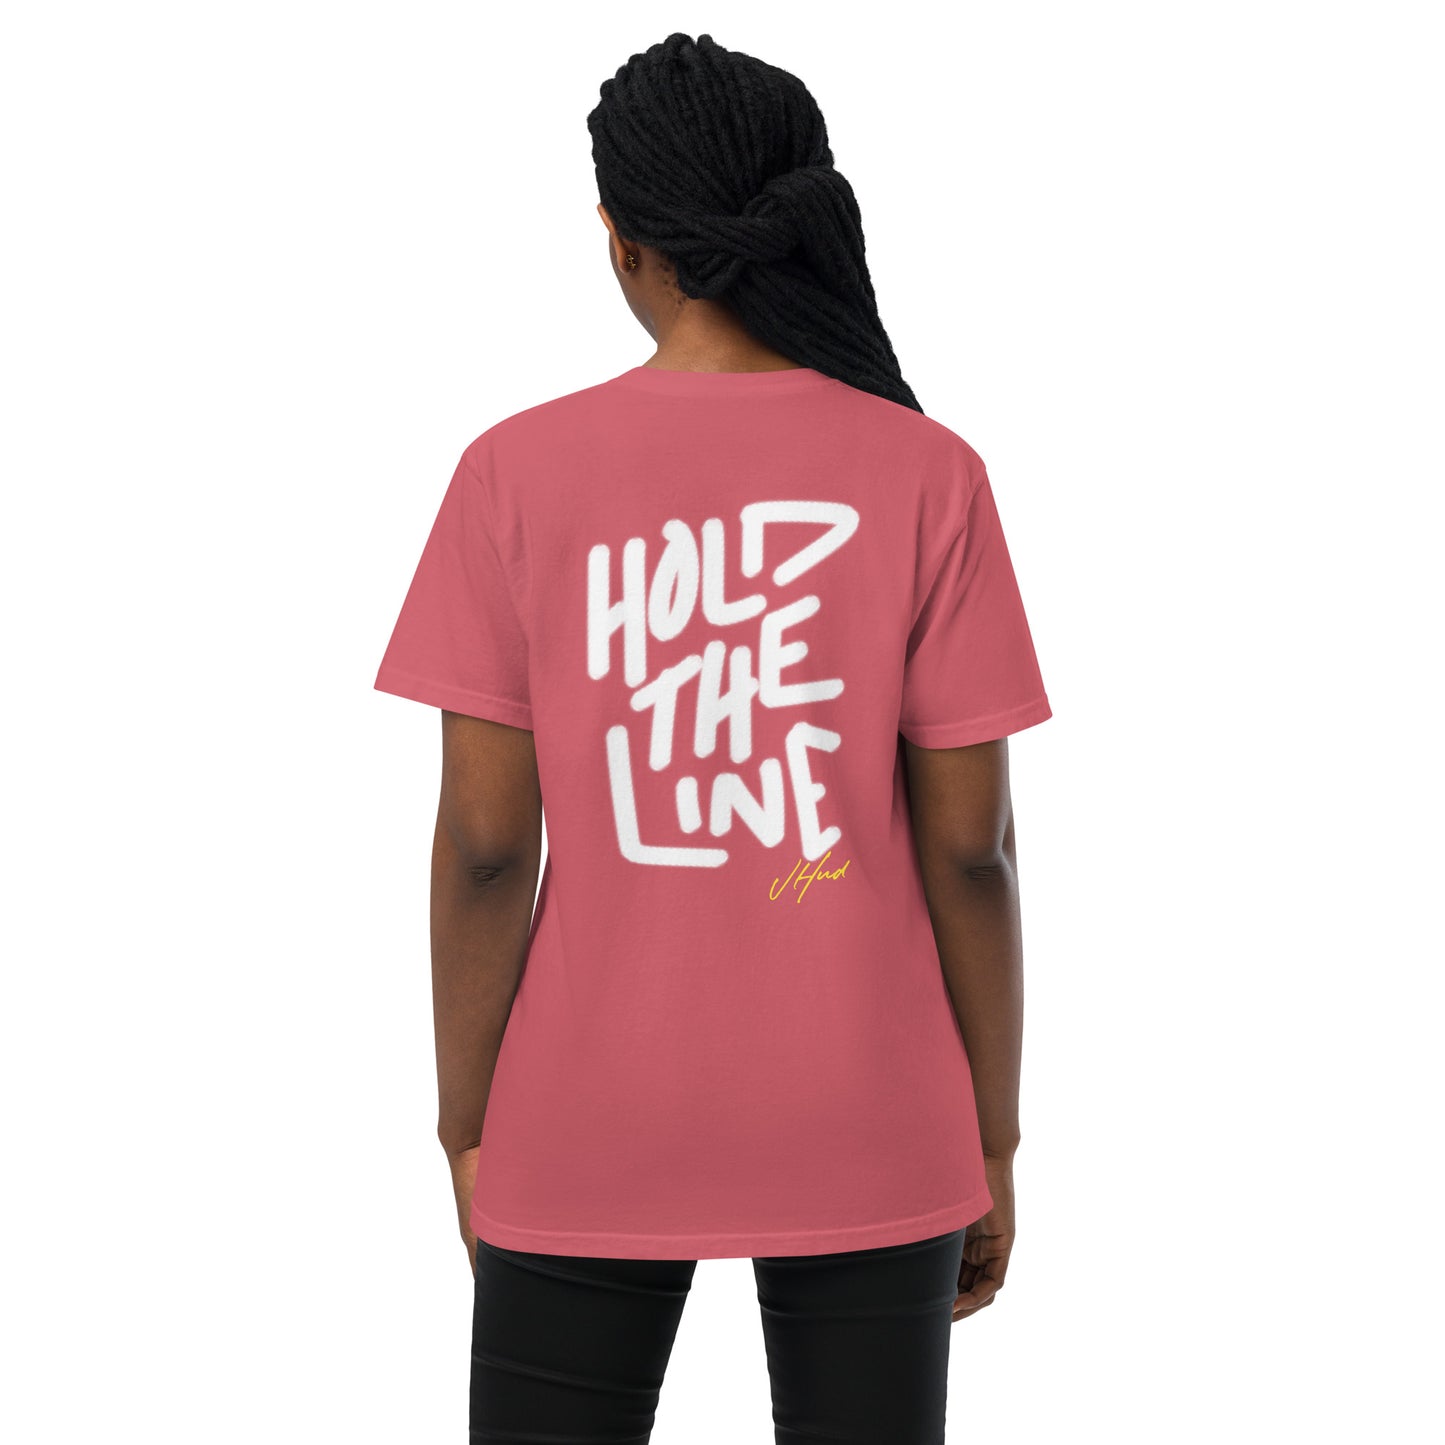 Hold the Line Heavyweight Pocket T-Shirt - Violet